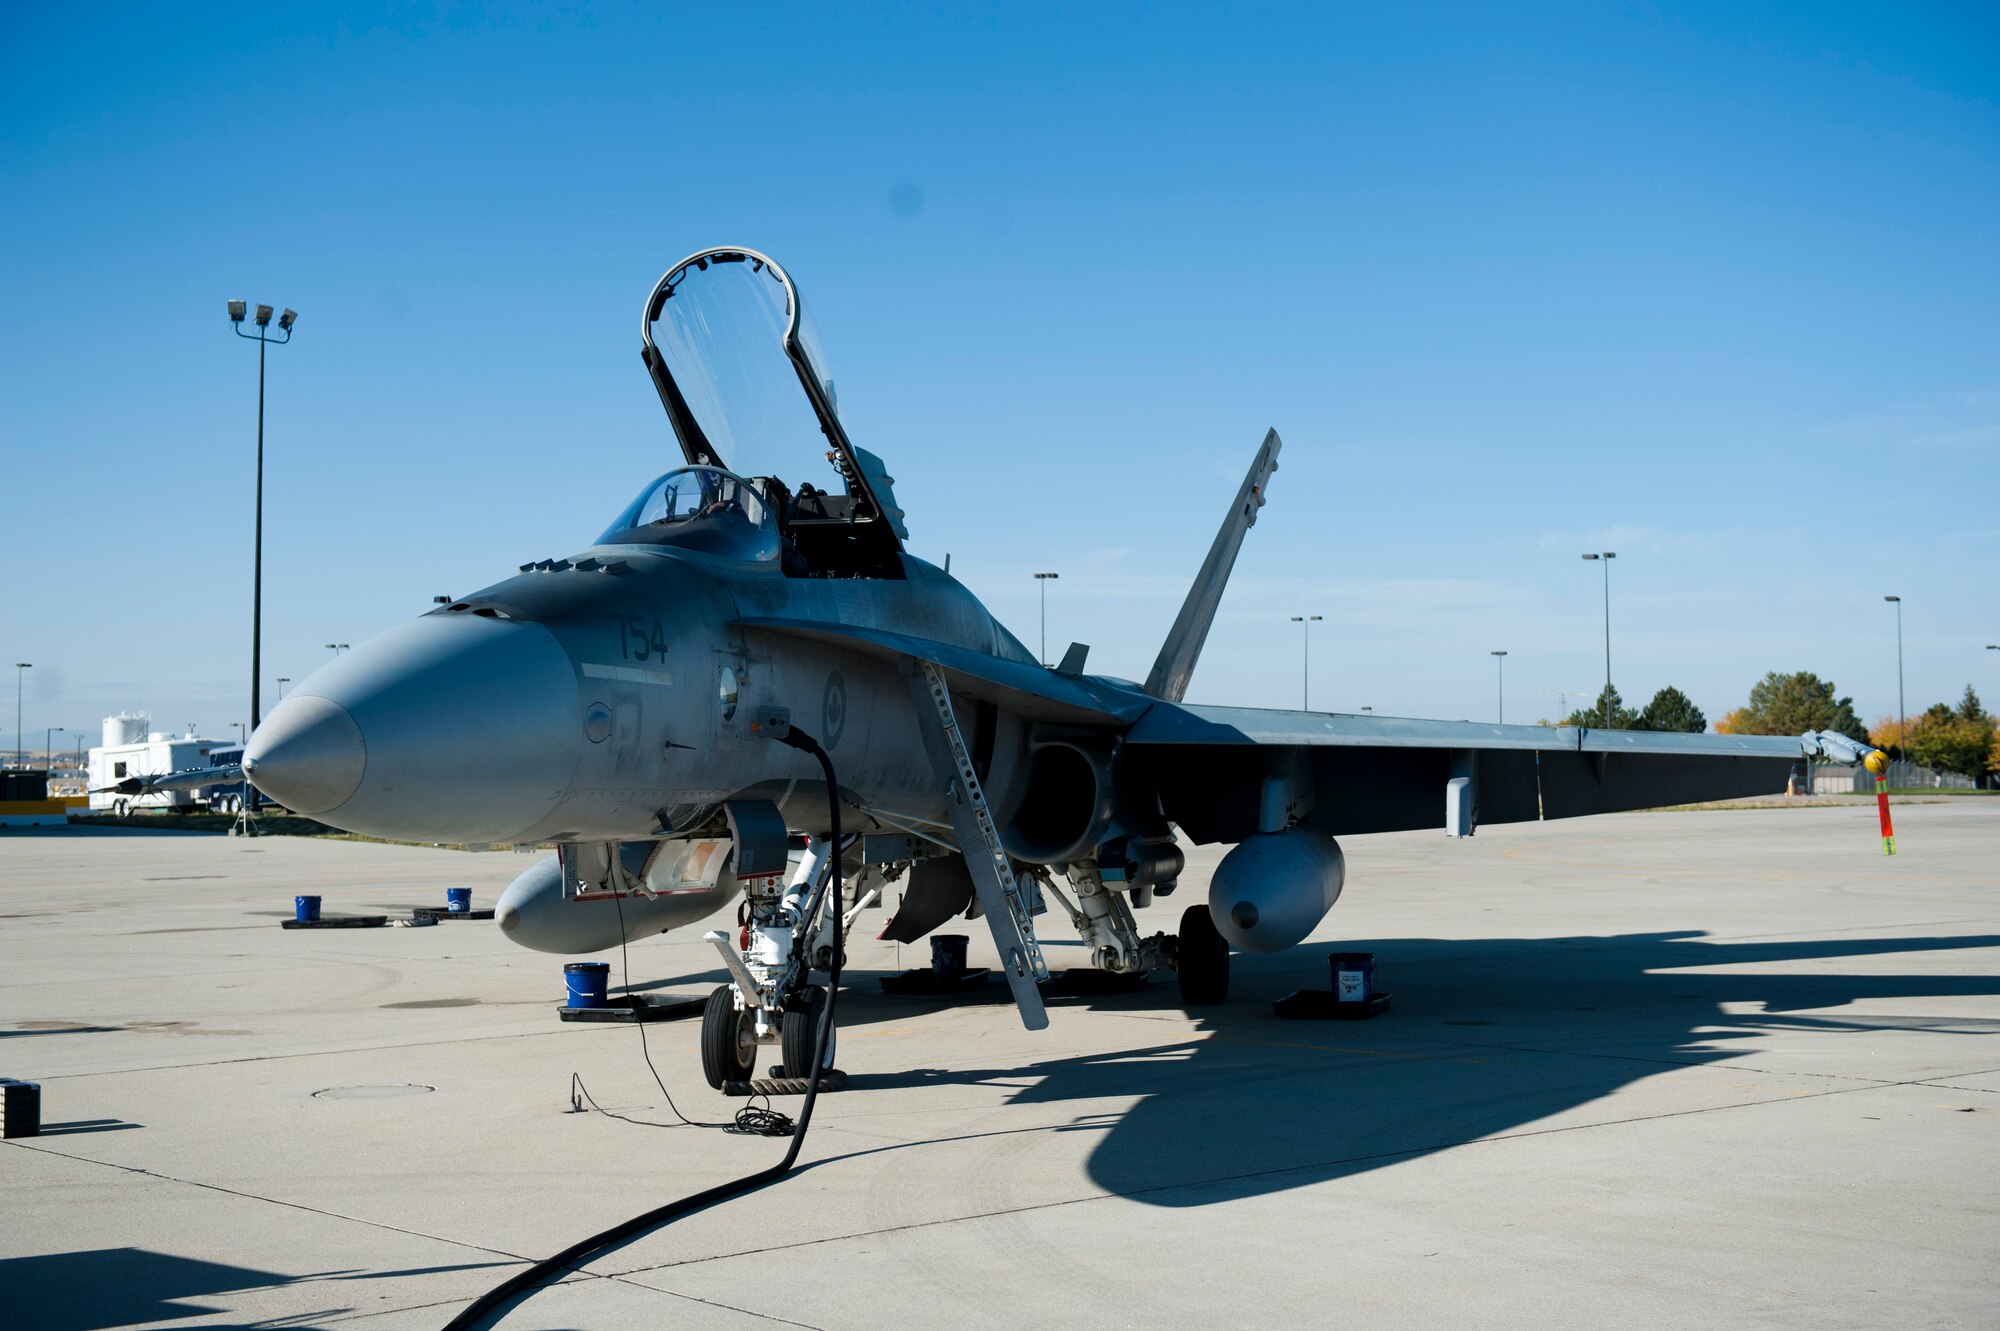 A CF-18 Hornet is being inspected by a Royal Canadian Air Force Airman at Gowen Field, Idaho, Oct. 11, 2013. Routine maintenance is performed on aircraft multiple times throughout the day to ensure the safety of the pilots flying them. (U.S. Air Force photo by Airman 1st Class Brittany A. Chase/Released)